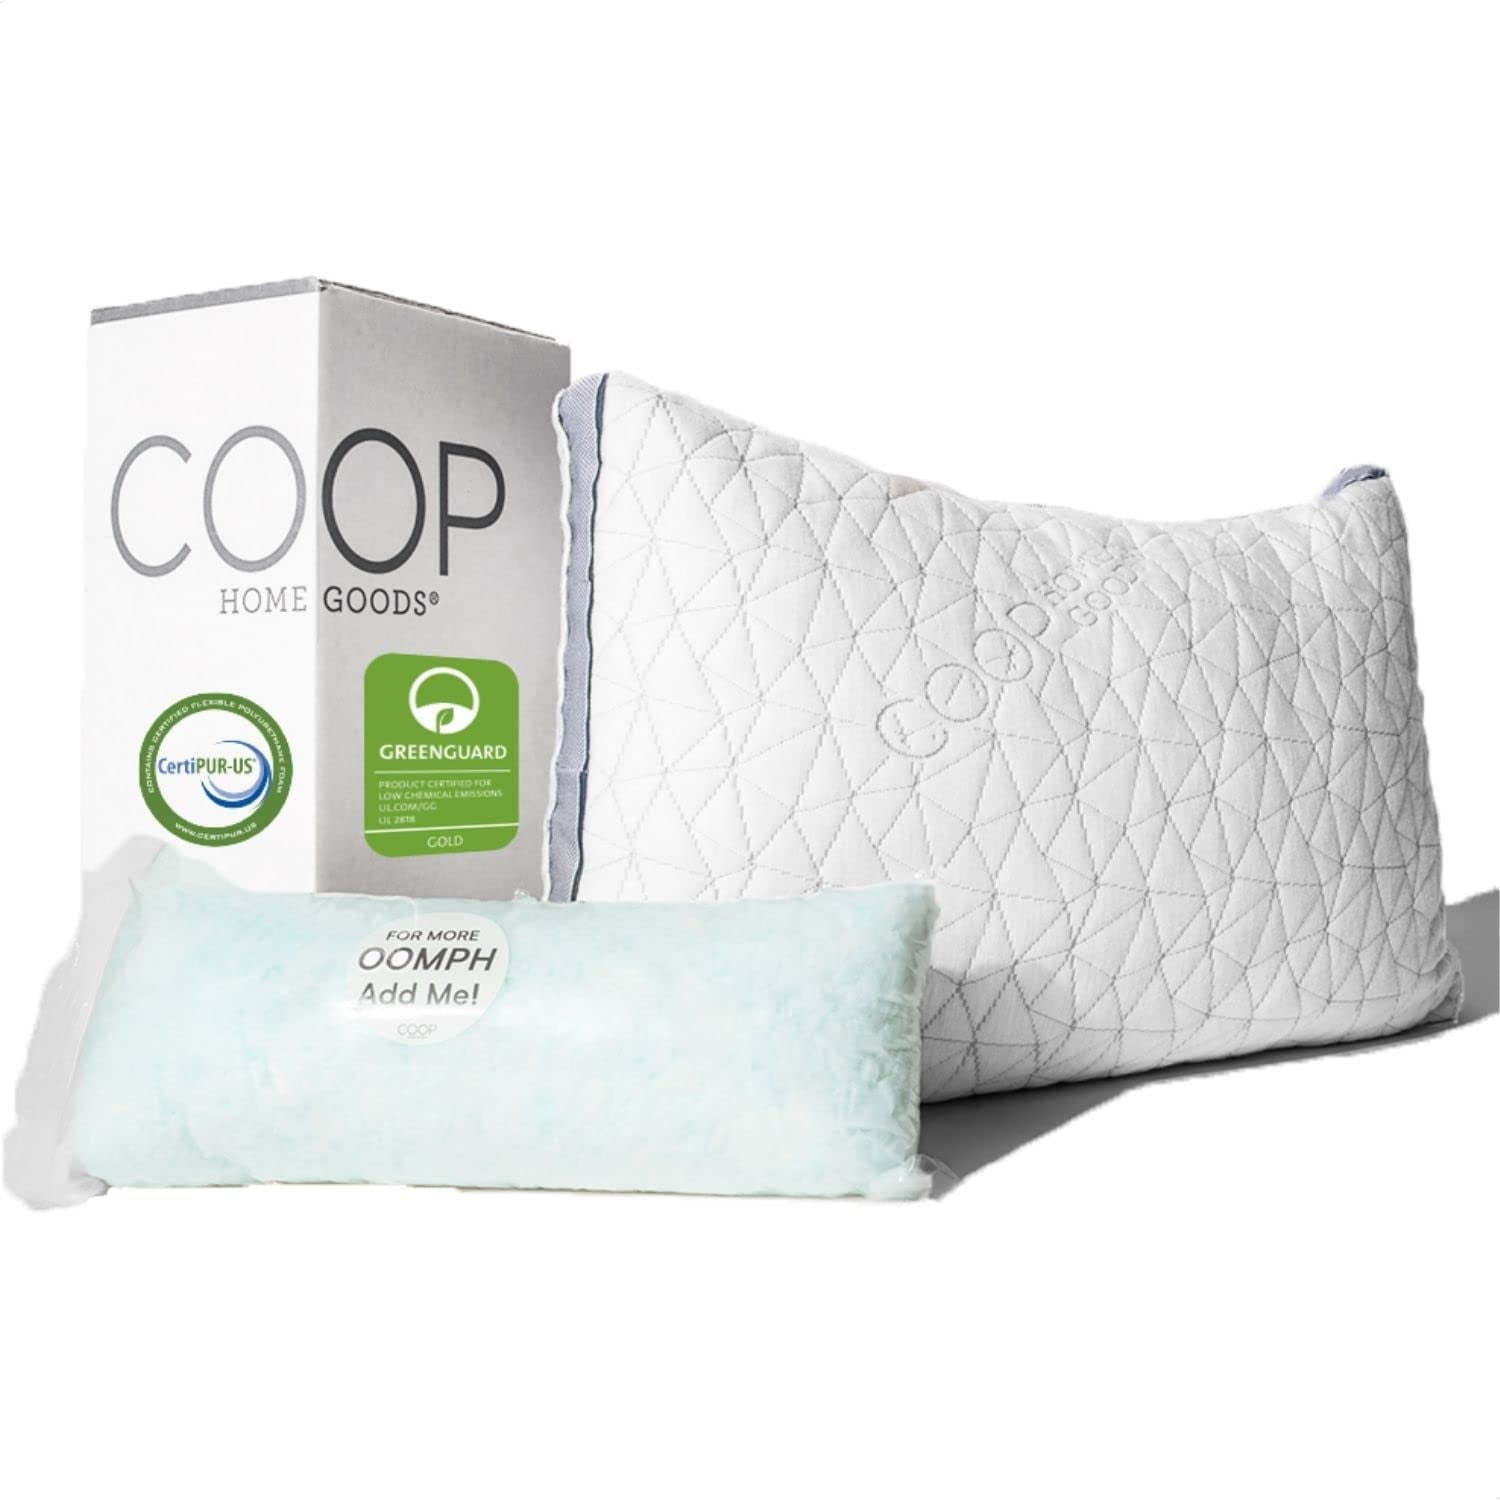 Shredded Memory Foam Pillow With Bamboo Cover Coop Home Goods Queen Size 